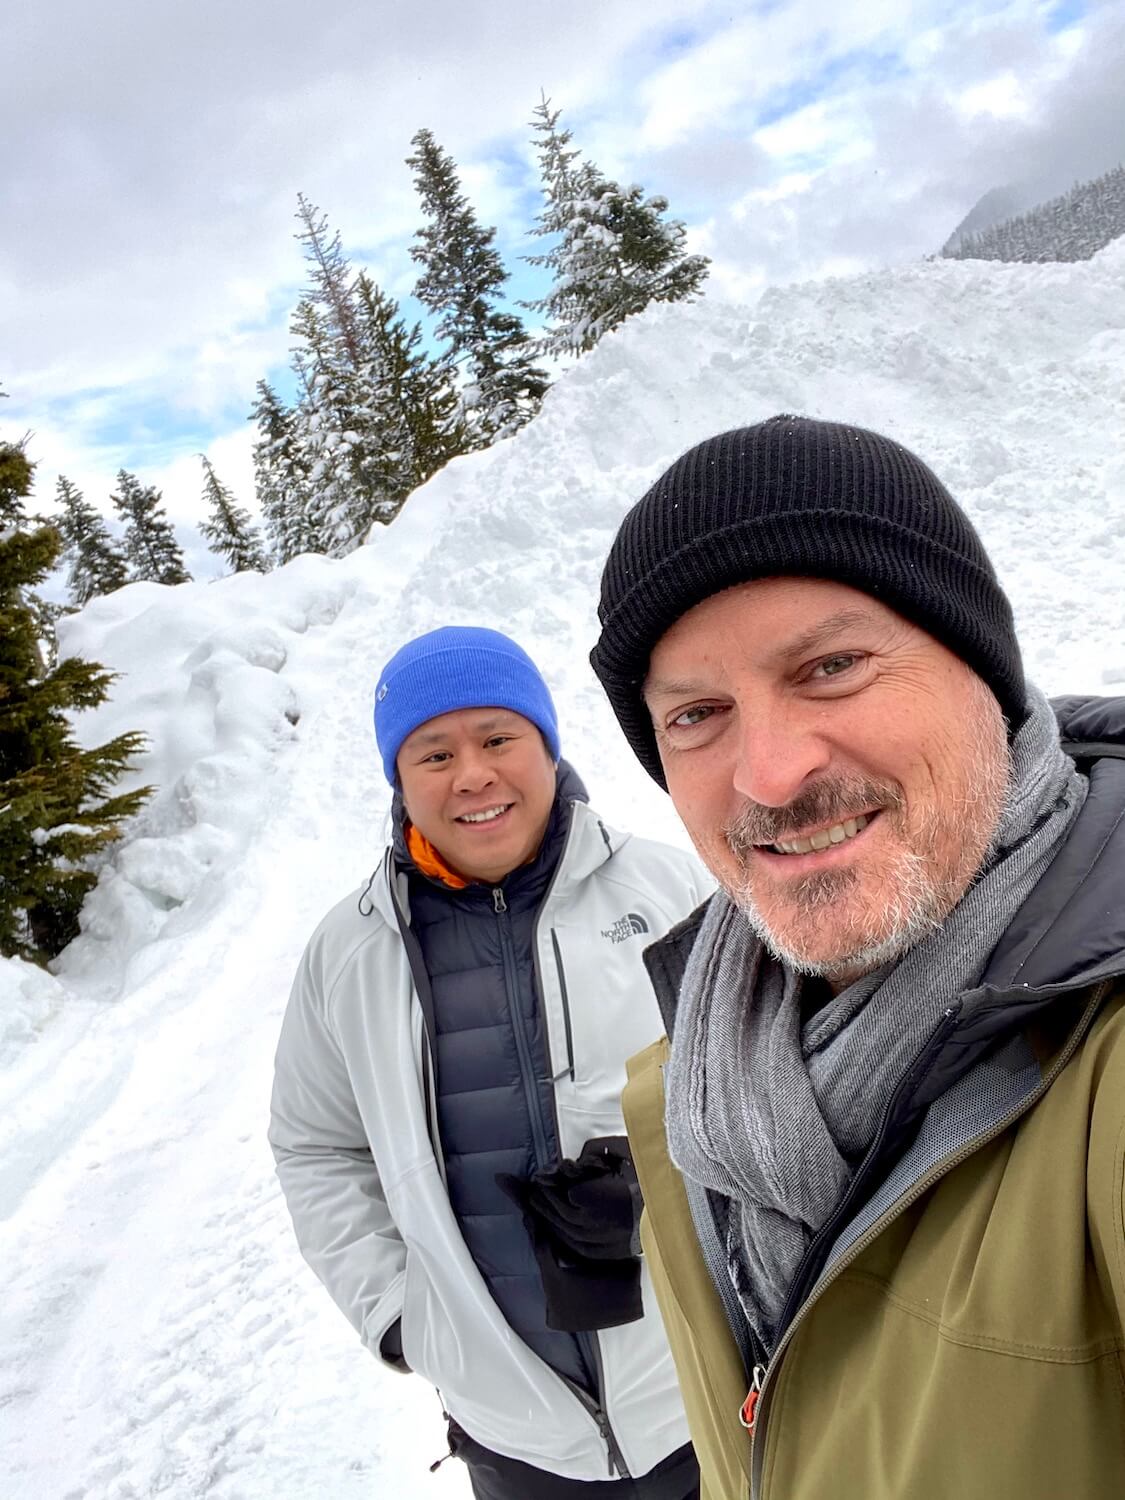 Matthew Kessi takes a selfie with his friend Mike, who is smiling and wearing a blue cap.  They are standing in front of a snow pile near the Nordic Center at White Pass and preparing to enjoy a day with snowshoes.  The blue sky is peeking through snow covered fir trees in the background.  